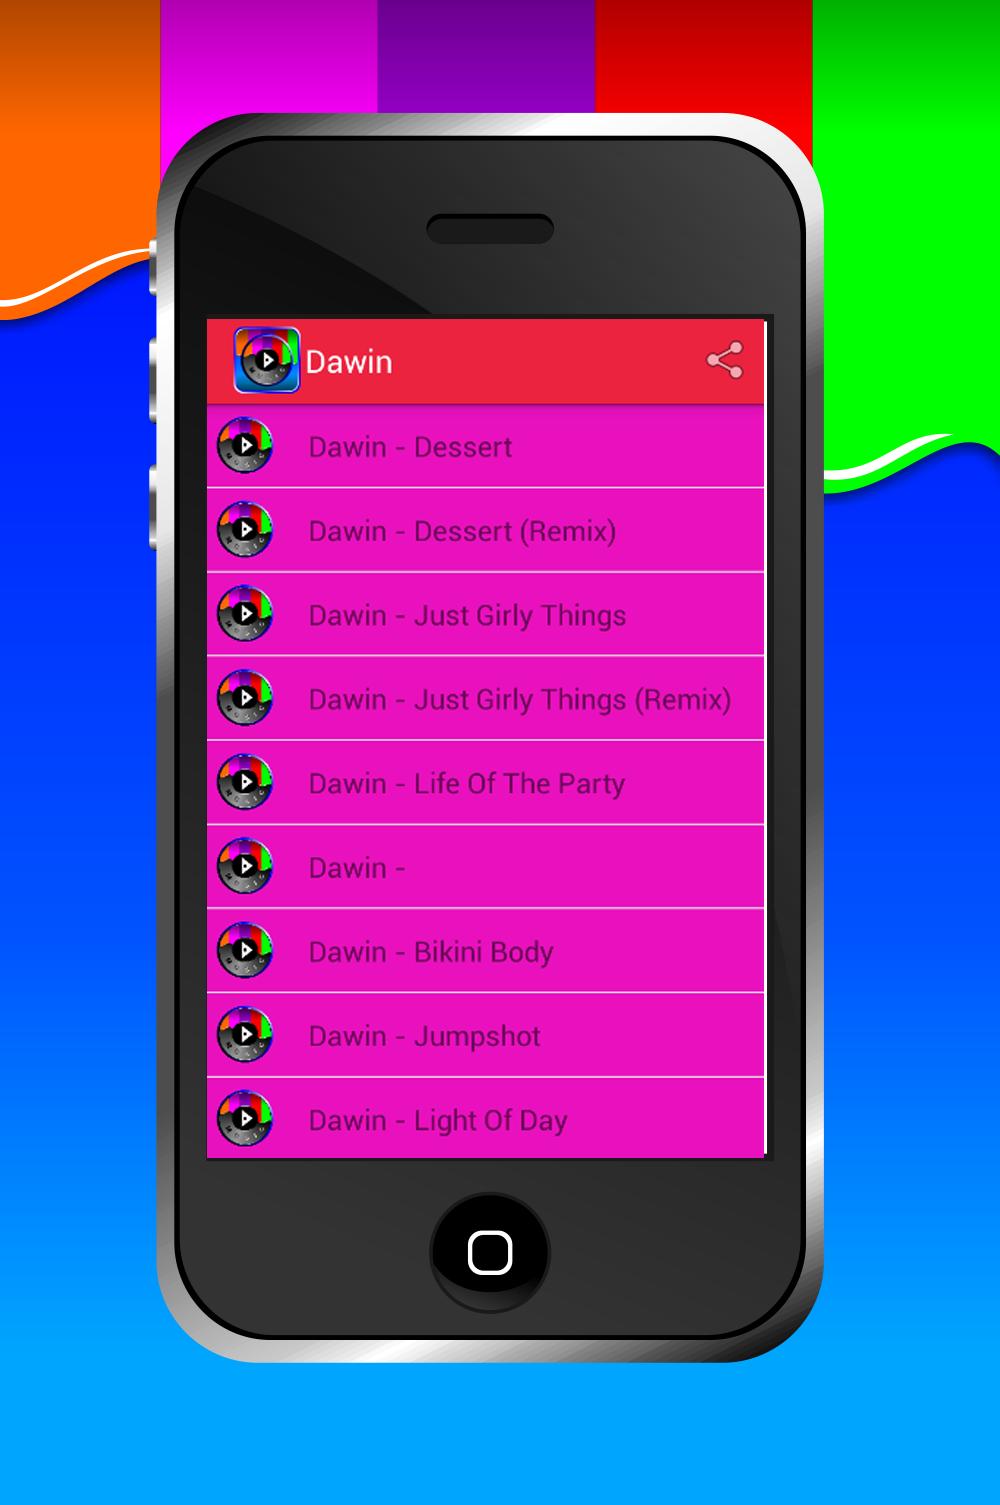 Dawin Dessert Mp3 for Android - APK Download